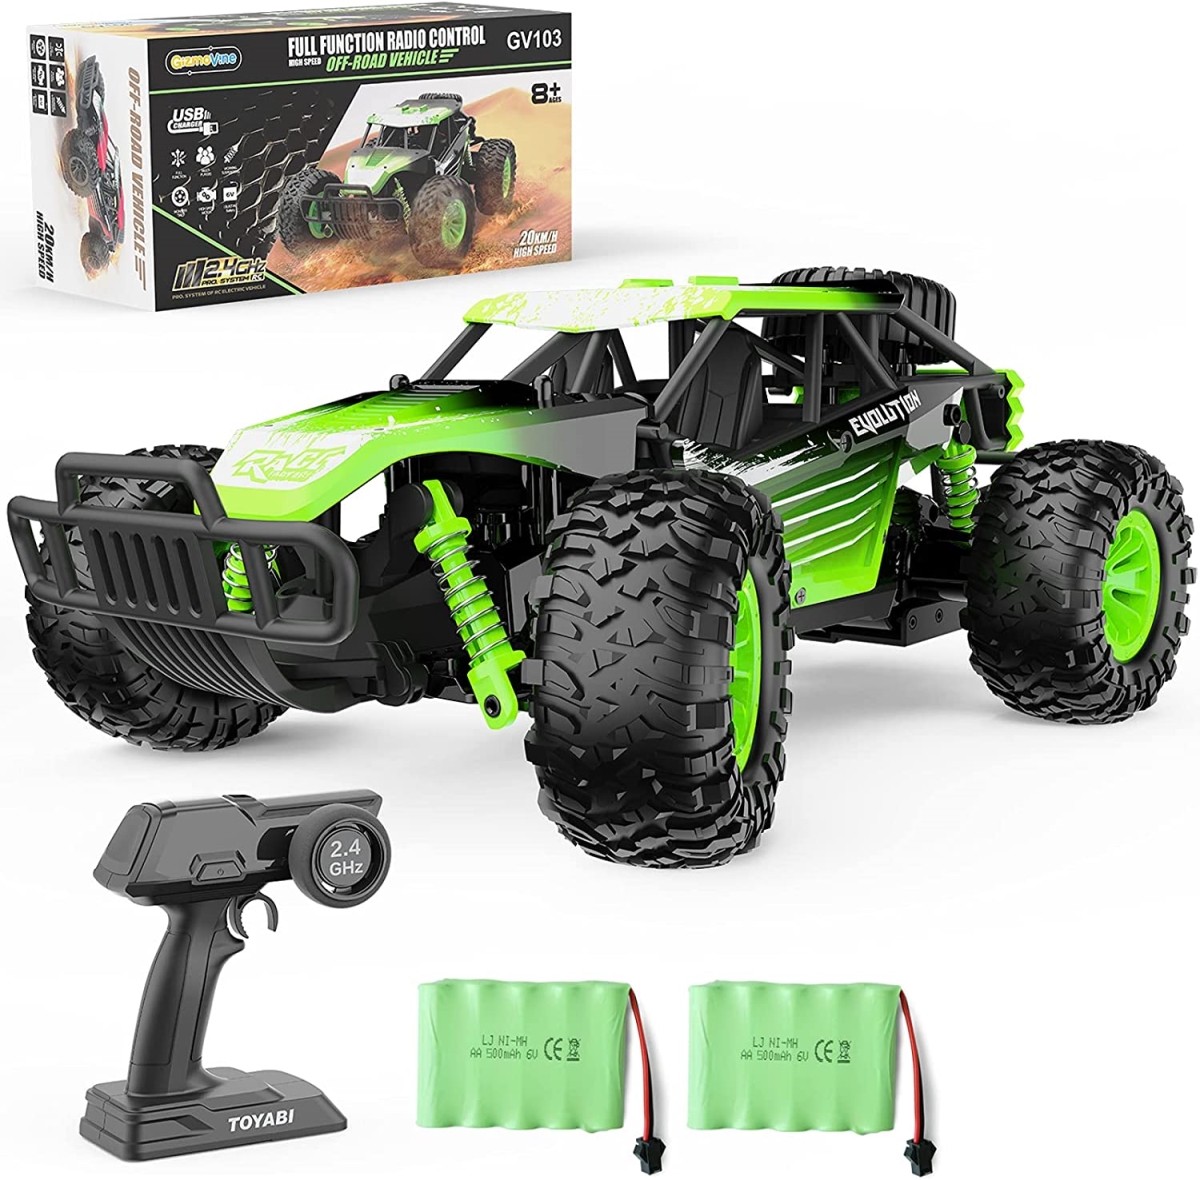 NC33077-AM Gizmovine Remote Control Car for 2020 Version Newest, Green -  IBOT